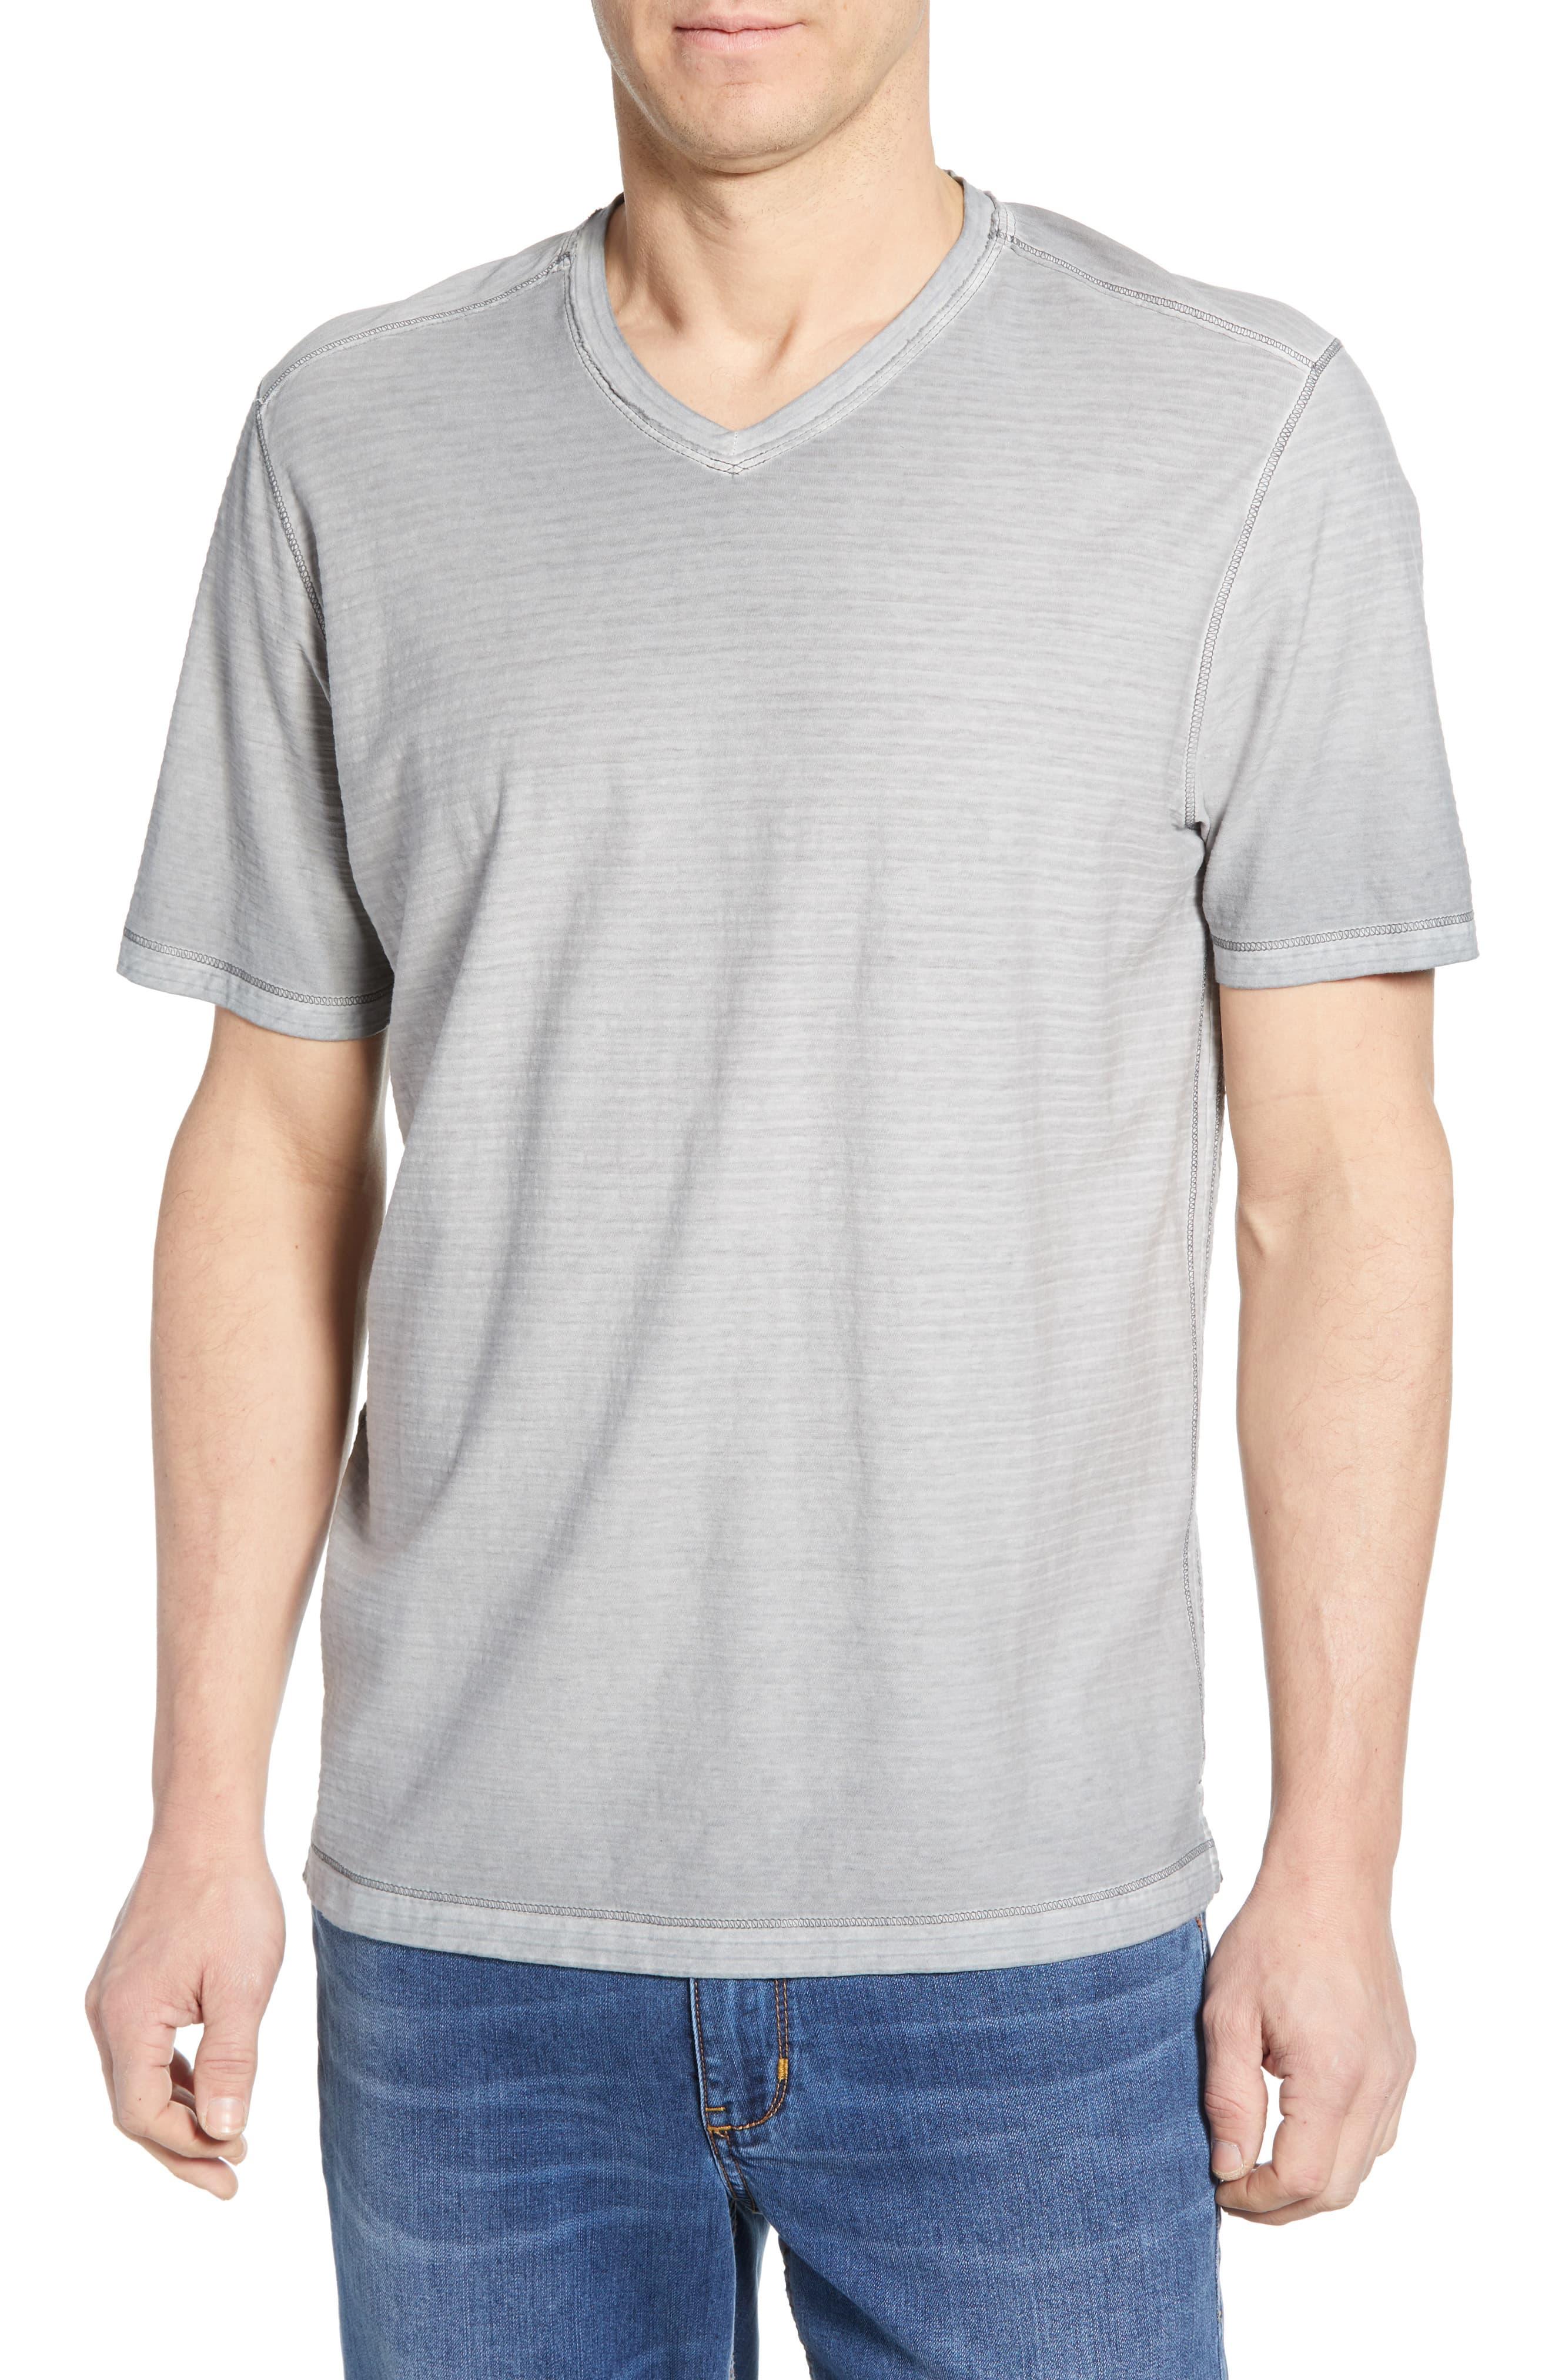 Tommy Bahama Cirrus Coast V-neck T-shirt in Gray for Men - Lyst